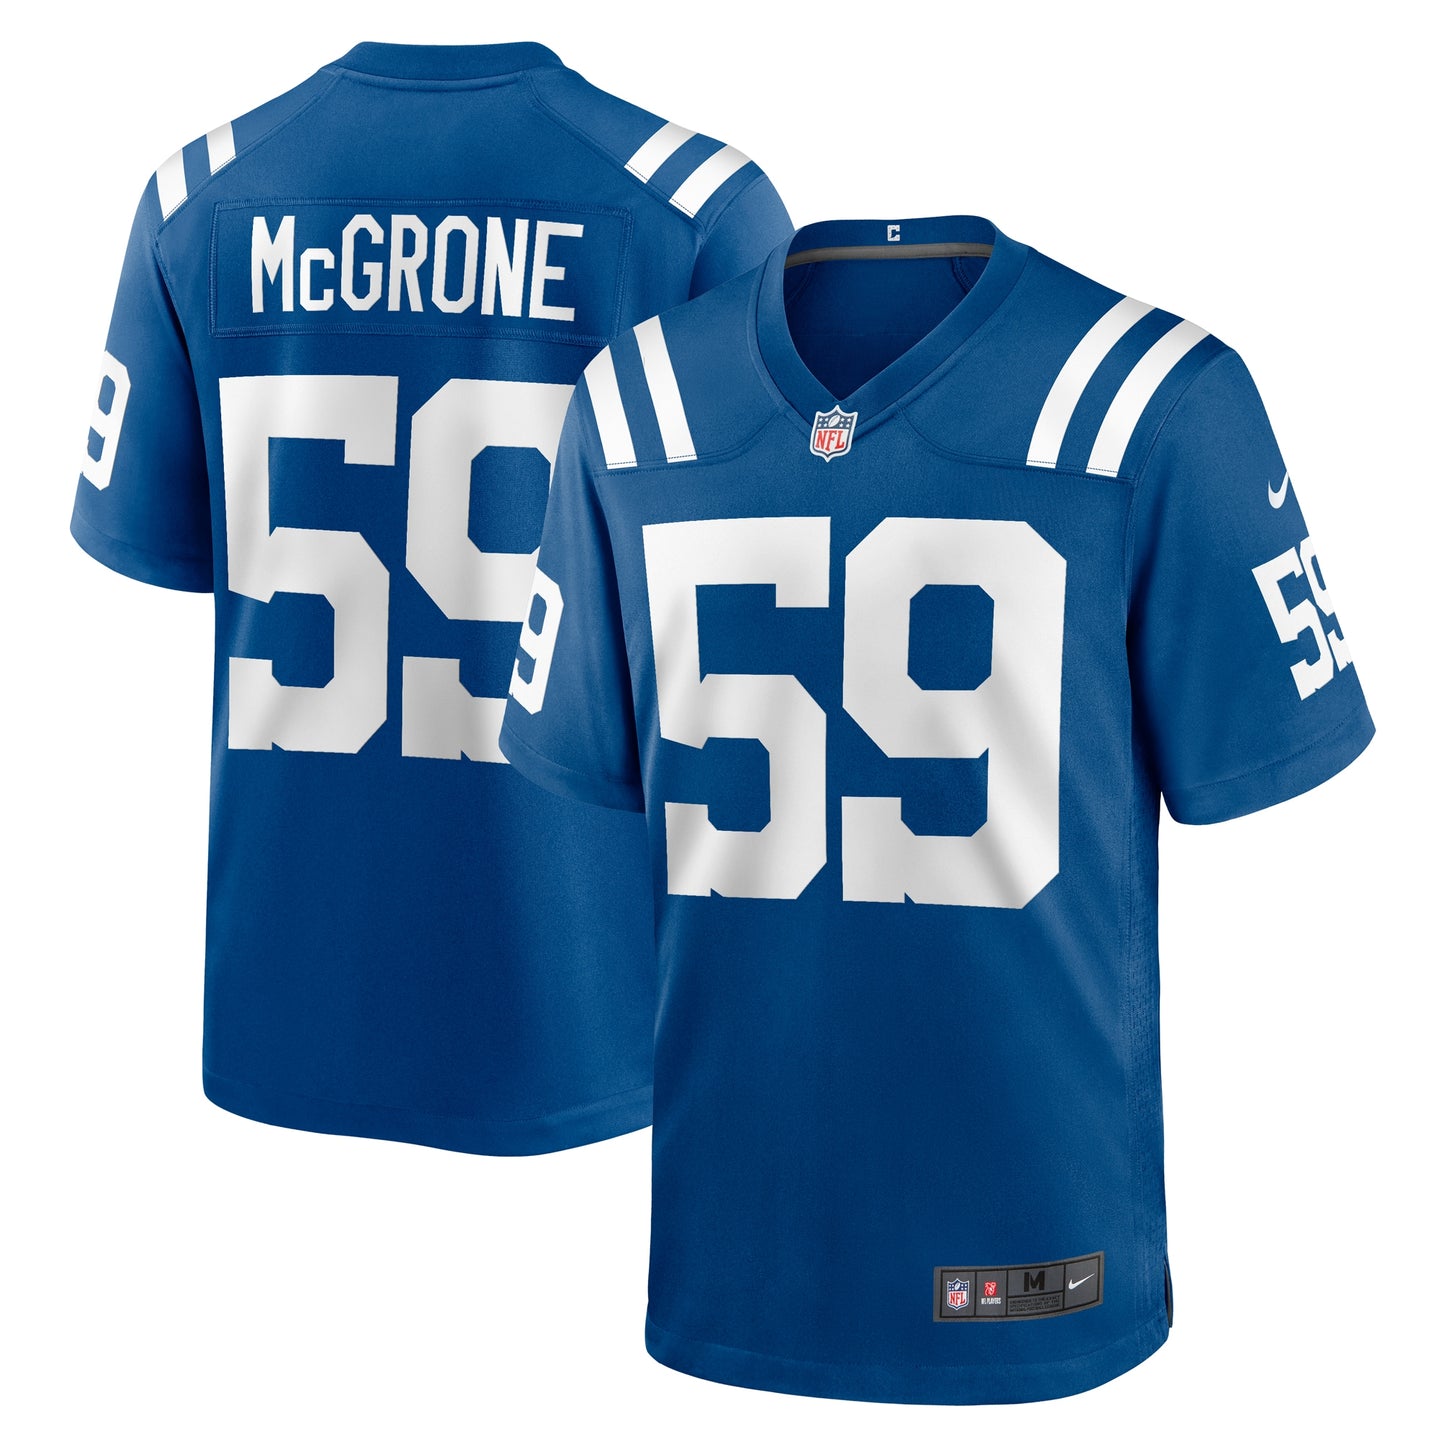 Cameron McGrone Indianapolis Colts Nike Team Game Jersey -  Royal